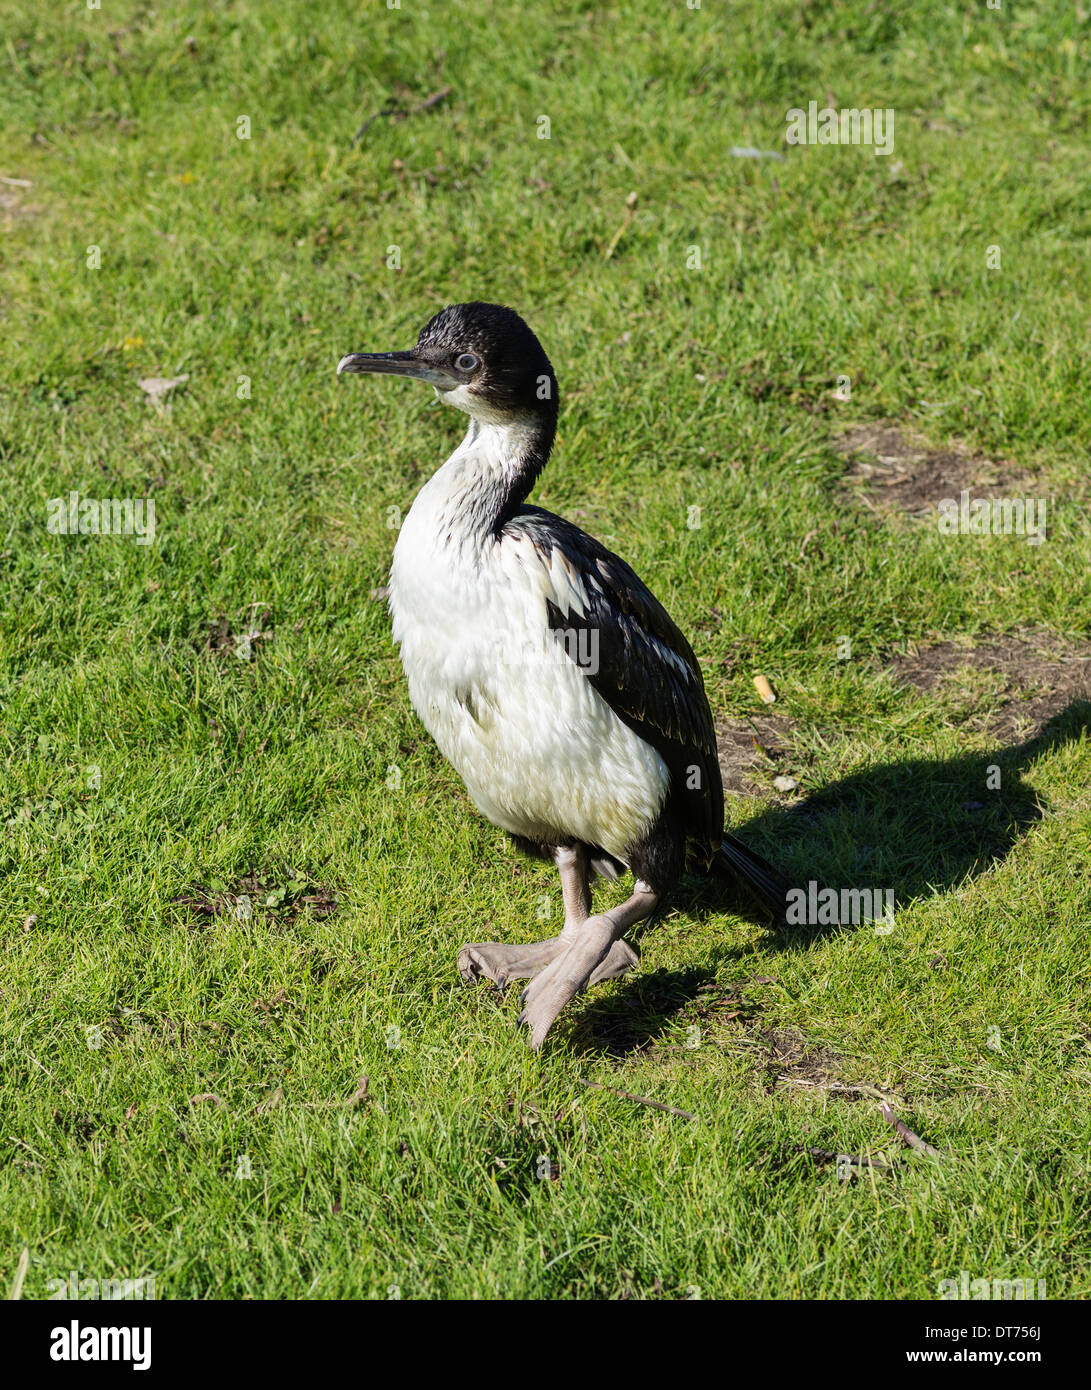 Cormorant or Shag diving bird standing on the grass Stock Photo